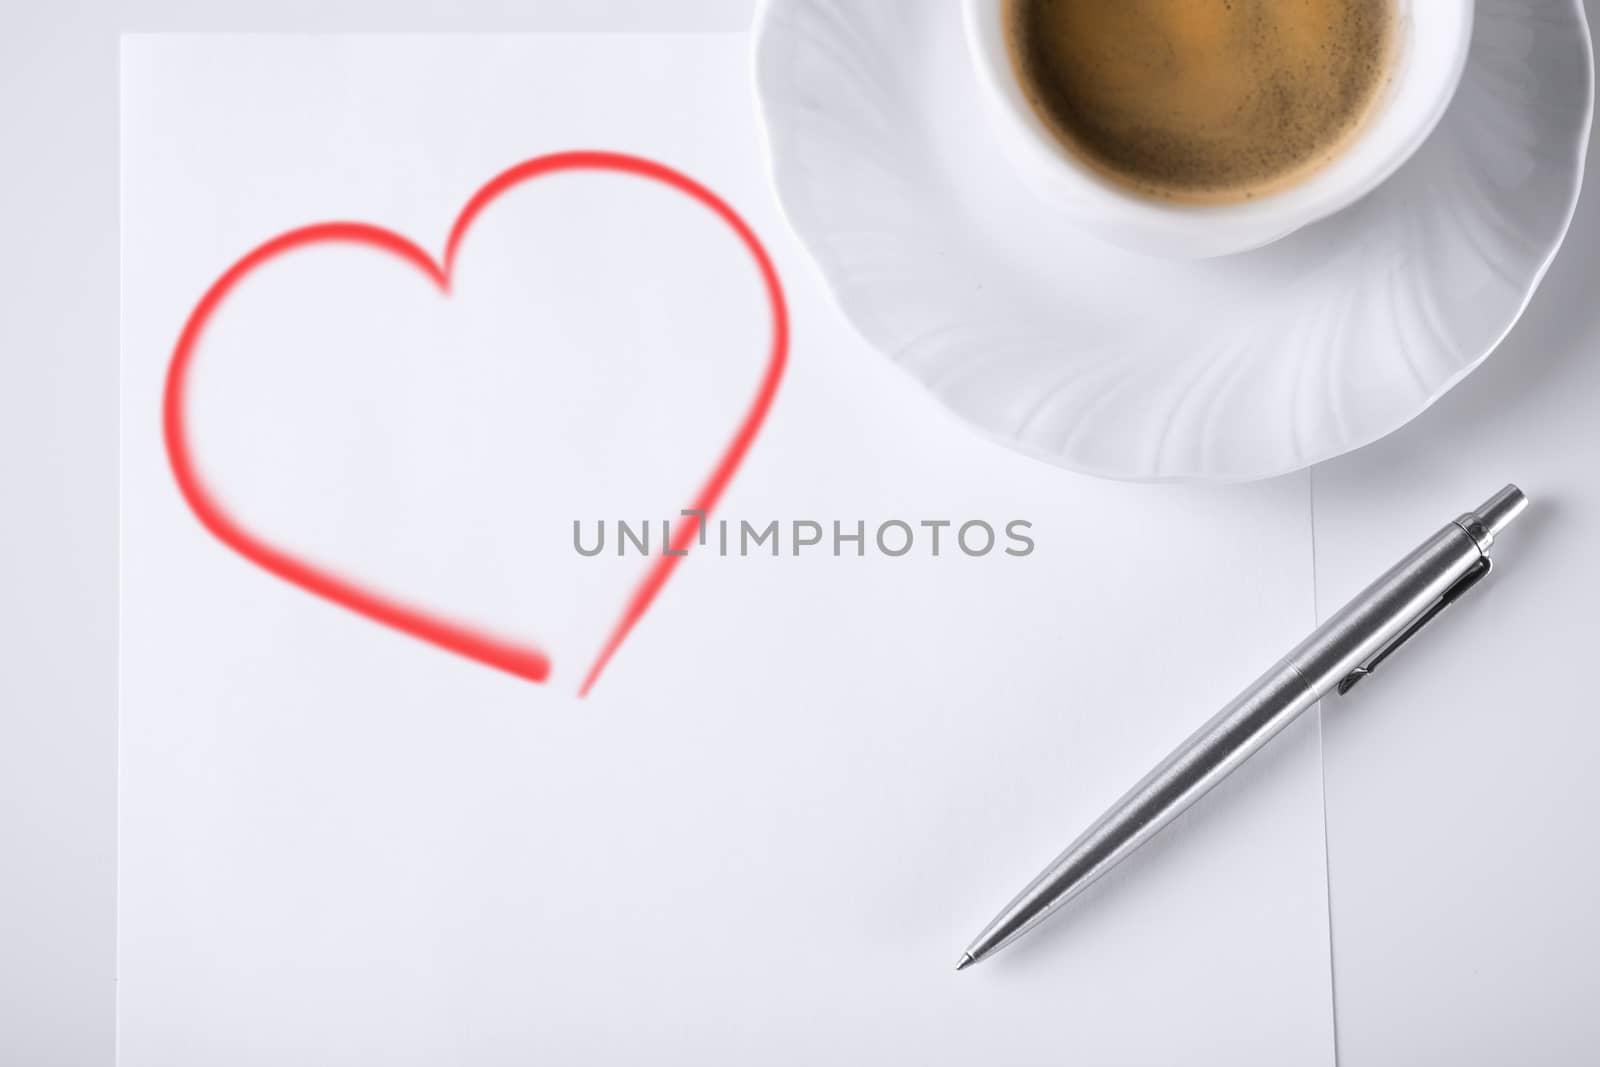 business and love concept - blank paper for note, pen and coffee